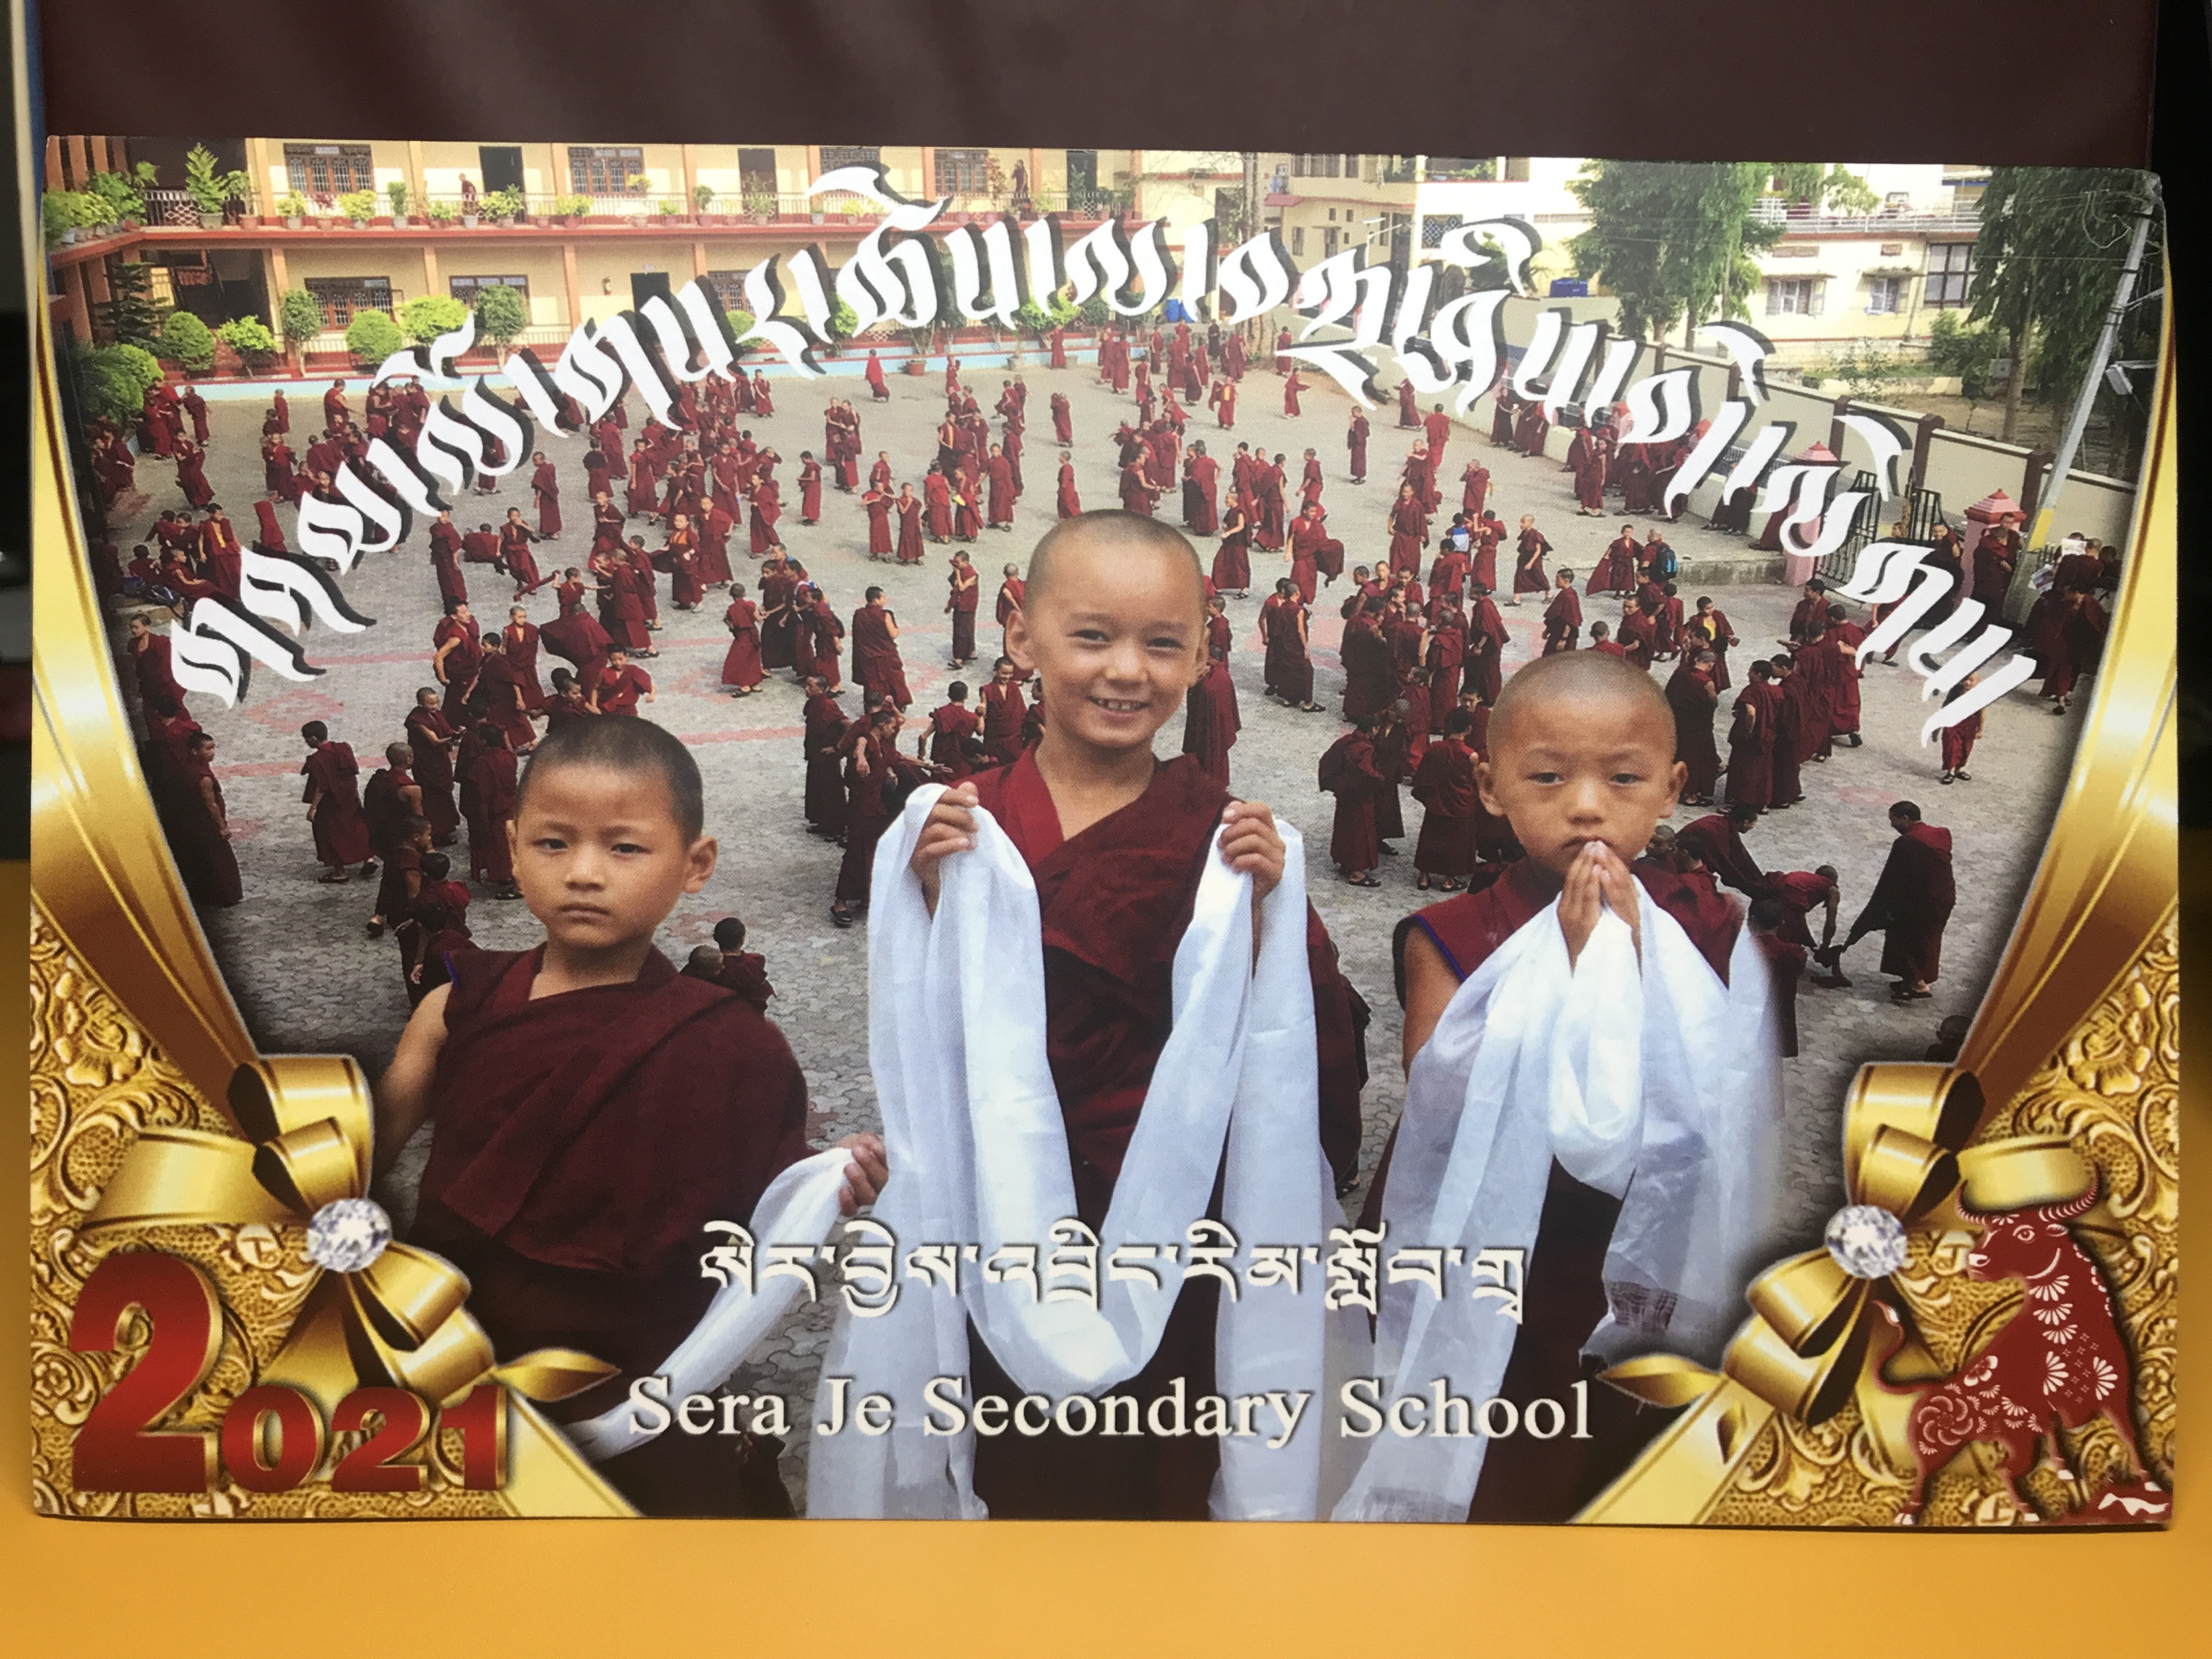 young monks at sera je secondary school in India offering kata scarves and wishing us a happy losar tibetan new year